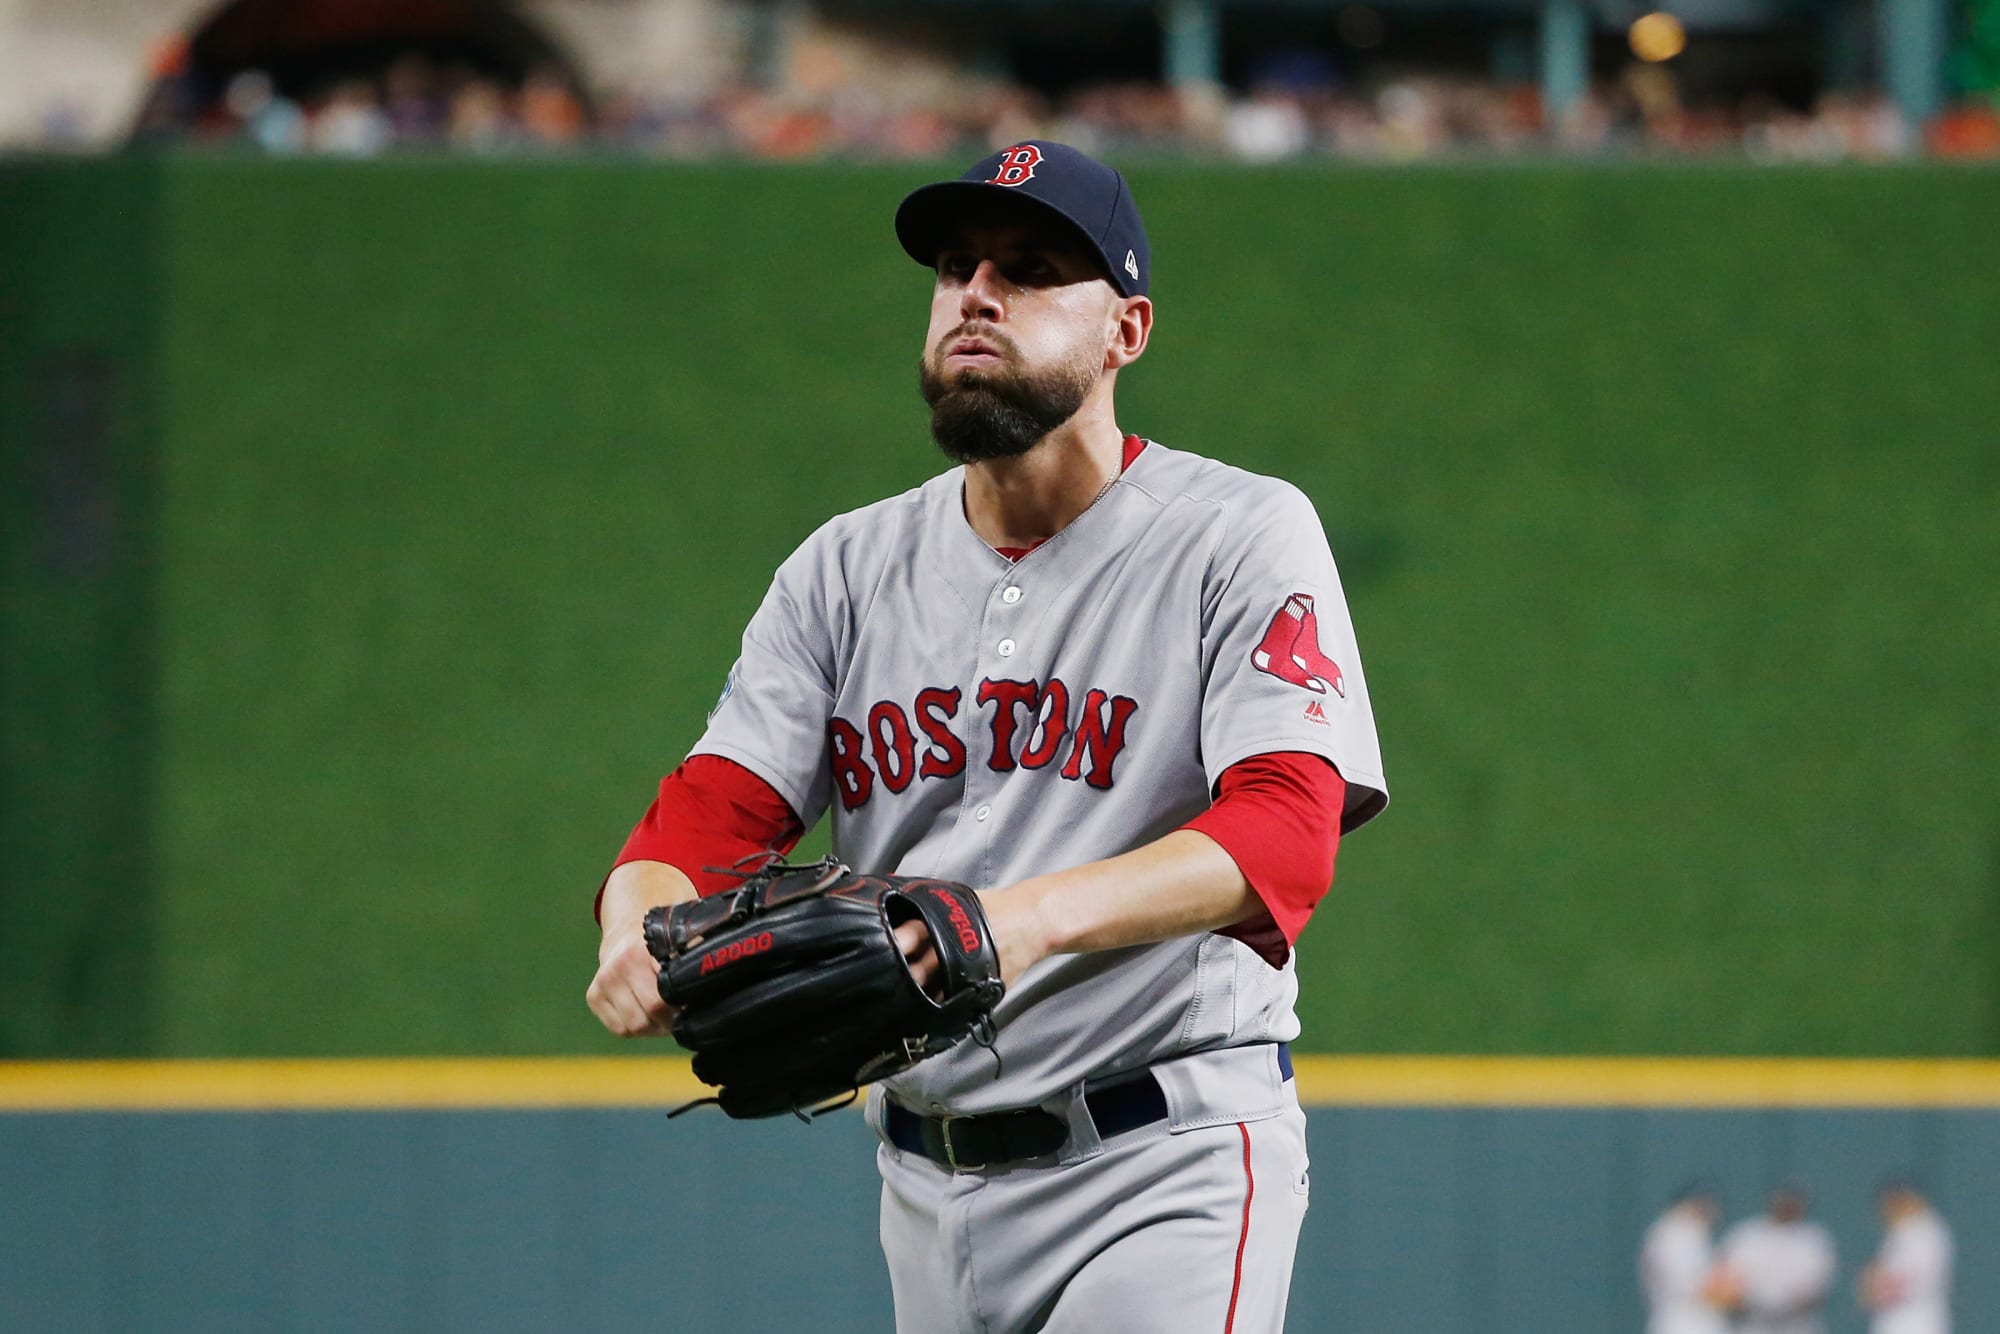 Red Sox News Pair of Boston pitchers never heard Astros' signals